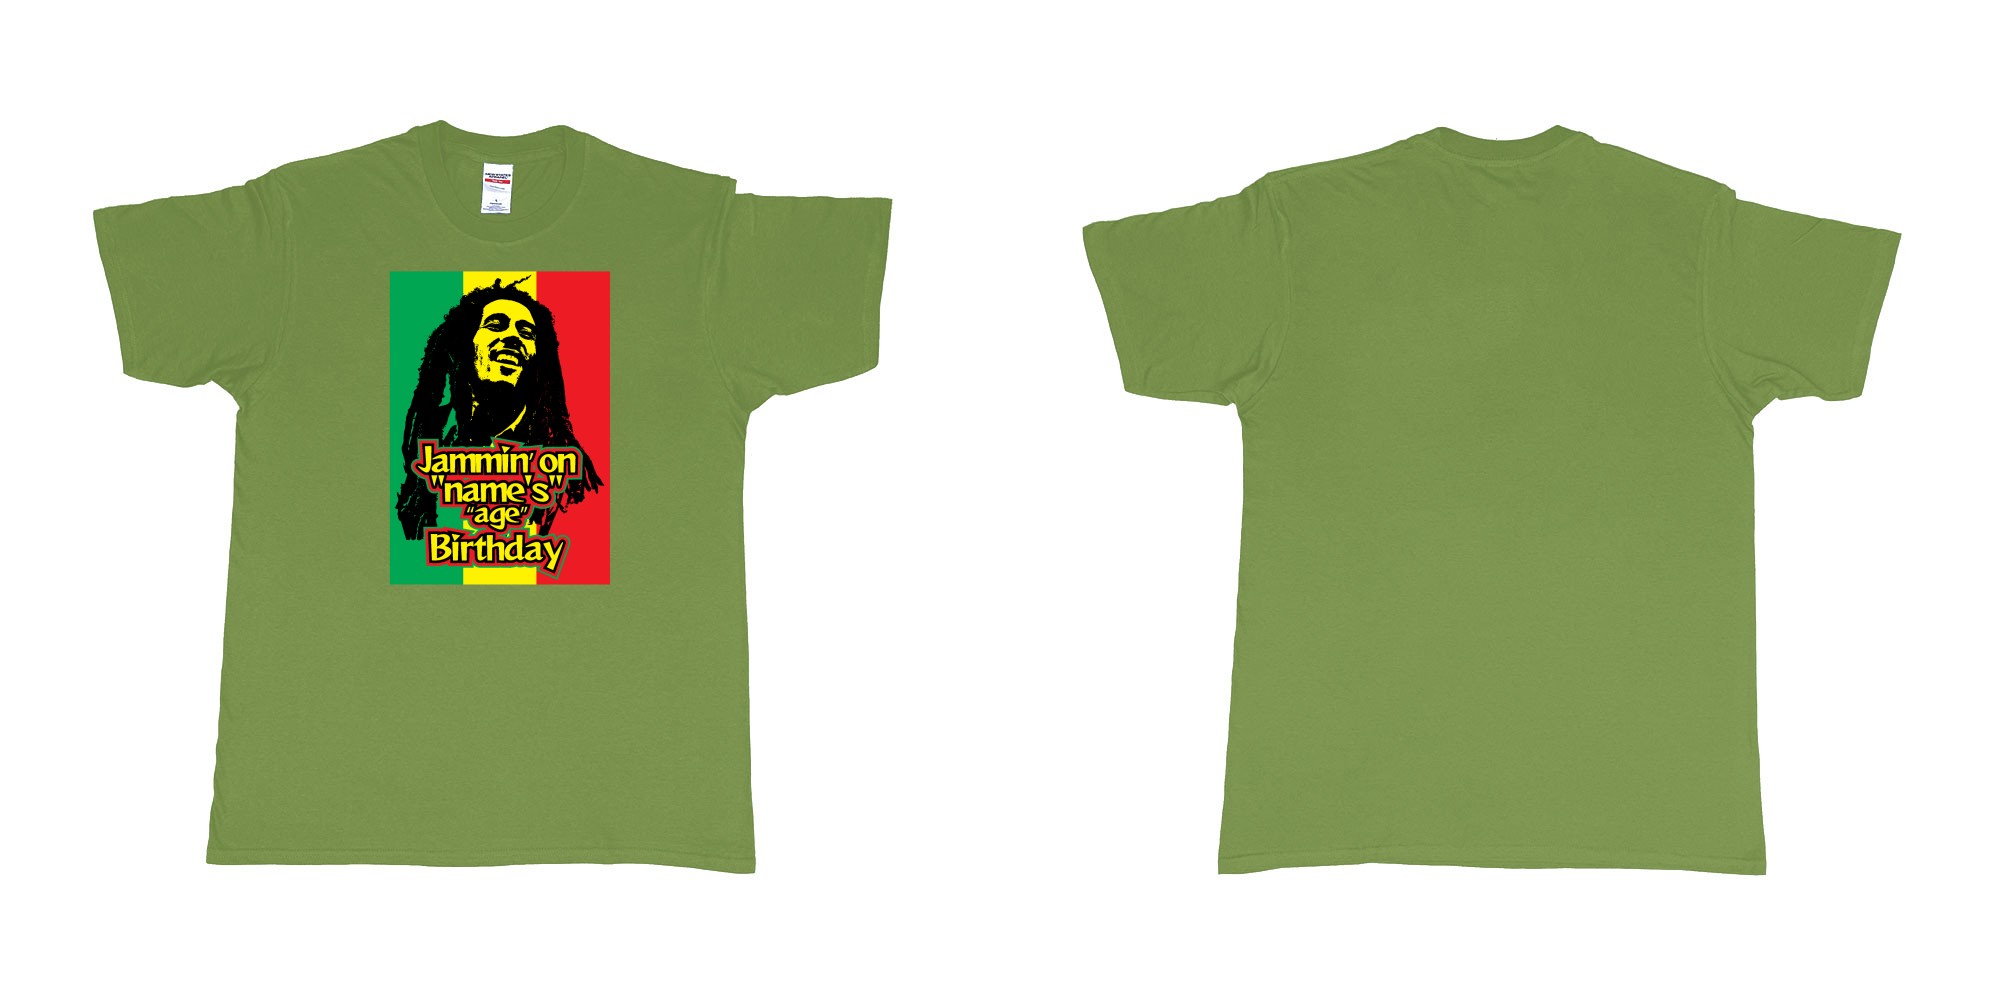 Custom tshirt design bob marley jammin on custom names birthday in fabric color military-green choice your own text made in Bali by The Pirate Way